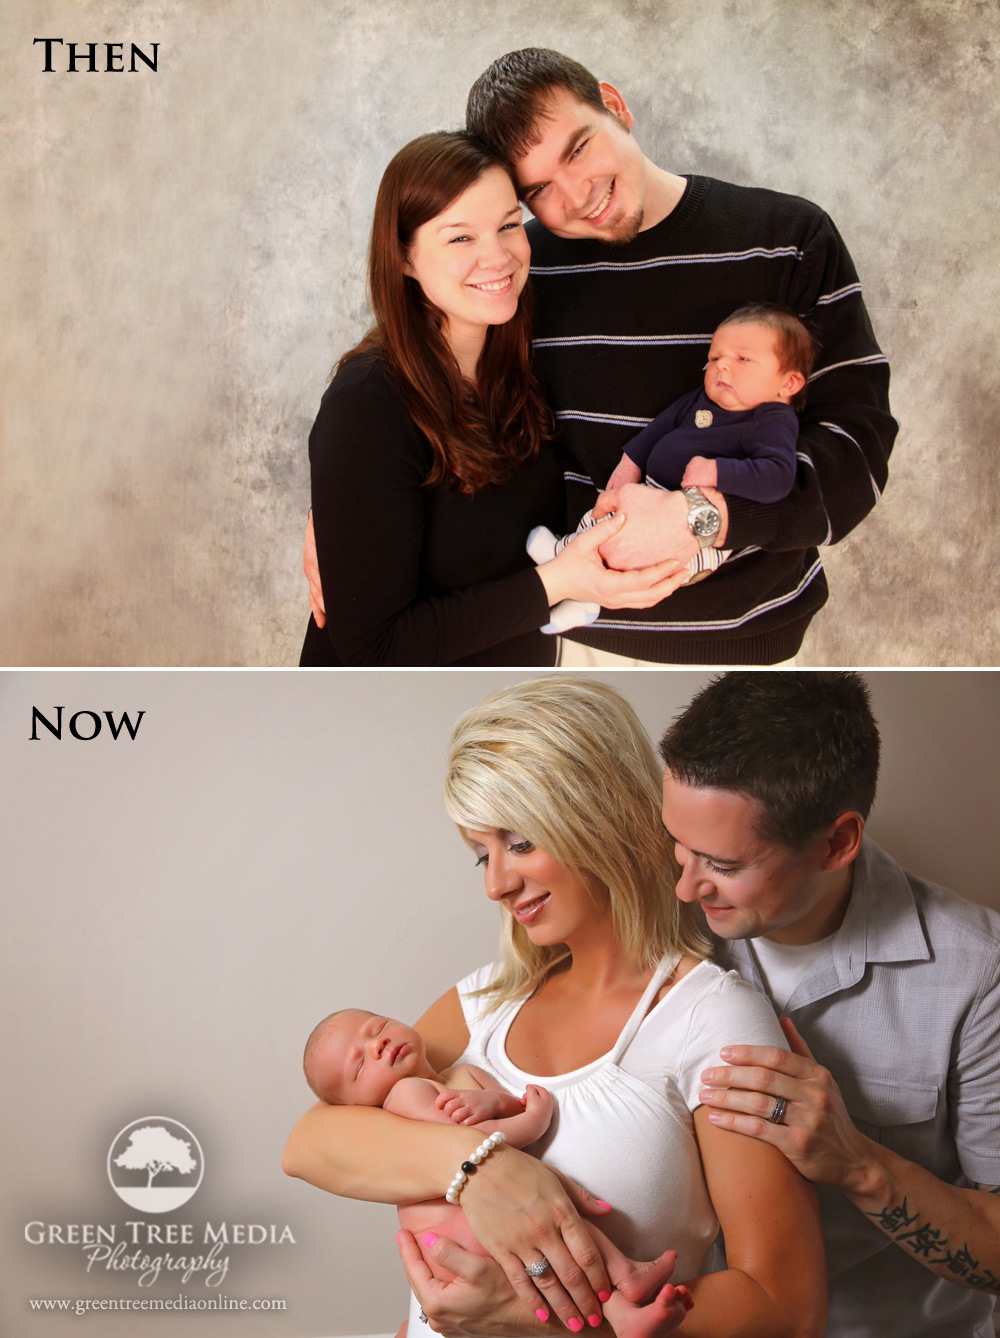 Then and Now Newborn